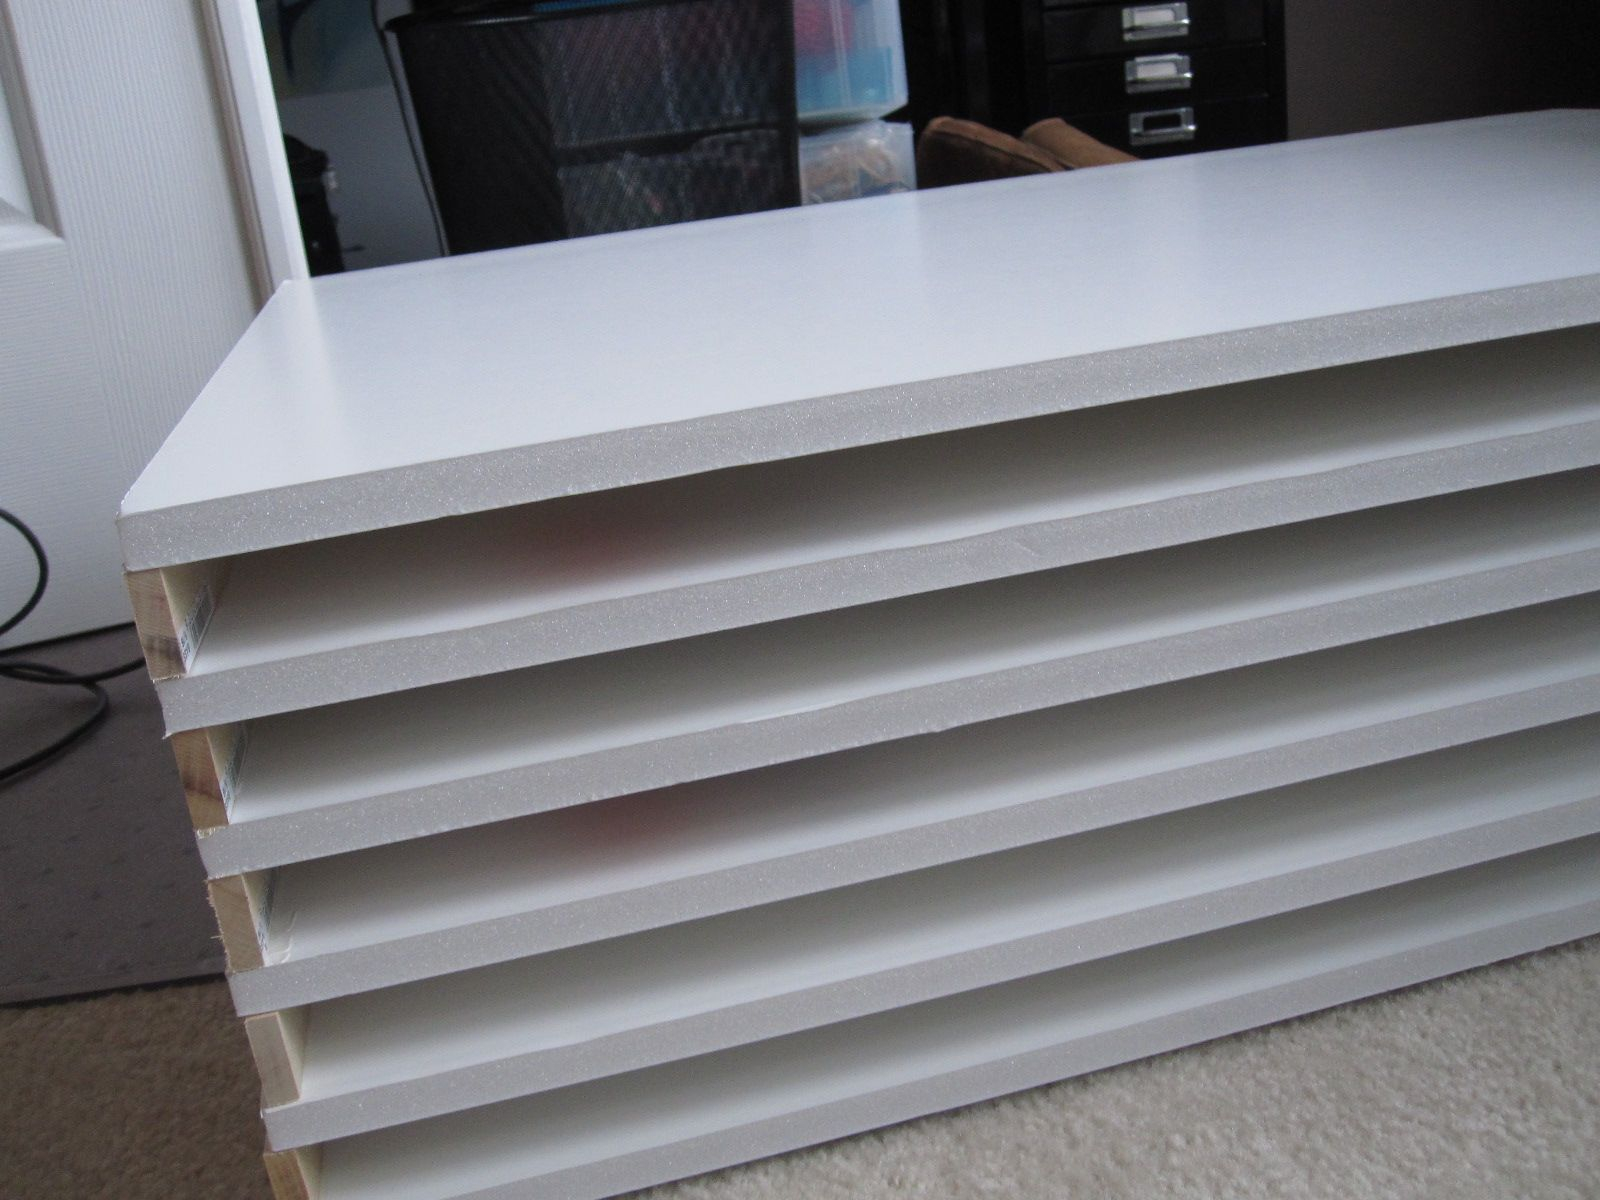 Flat Files Diy For 40 6 Sheets Of 12 Foam Core 2030 10 pertaining to measurements 1600 X 1200